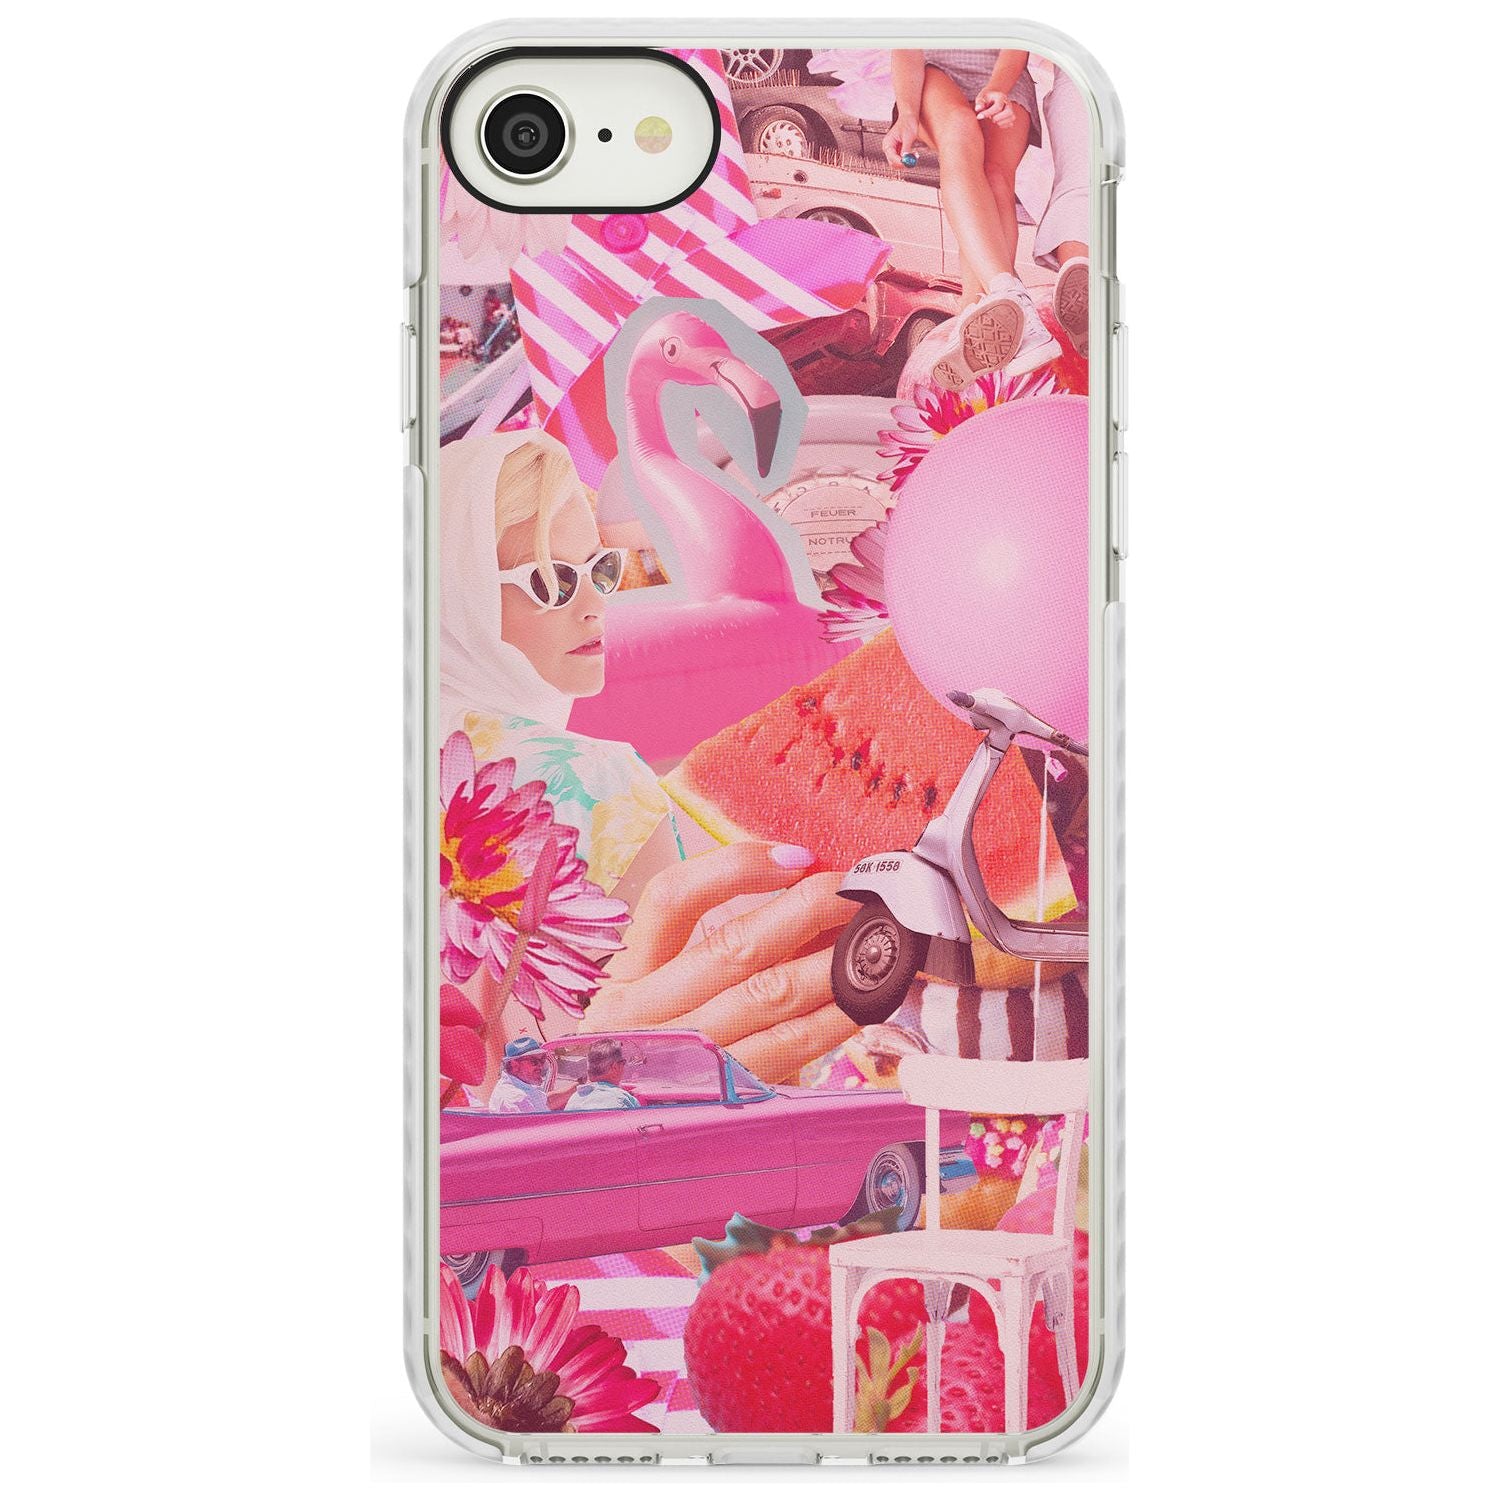 Vintage Collage: Pink Glamour Impact Phone Case for iPhone SE 8 7 Plus